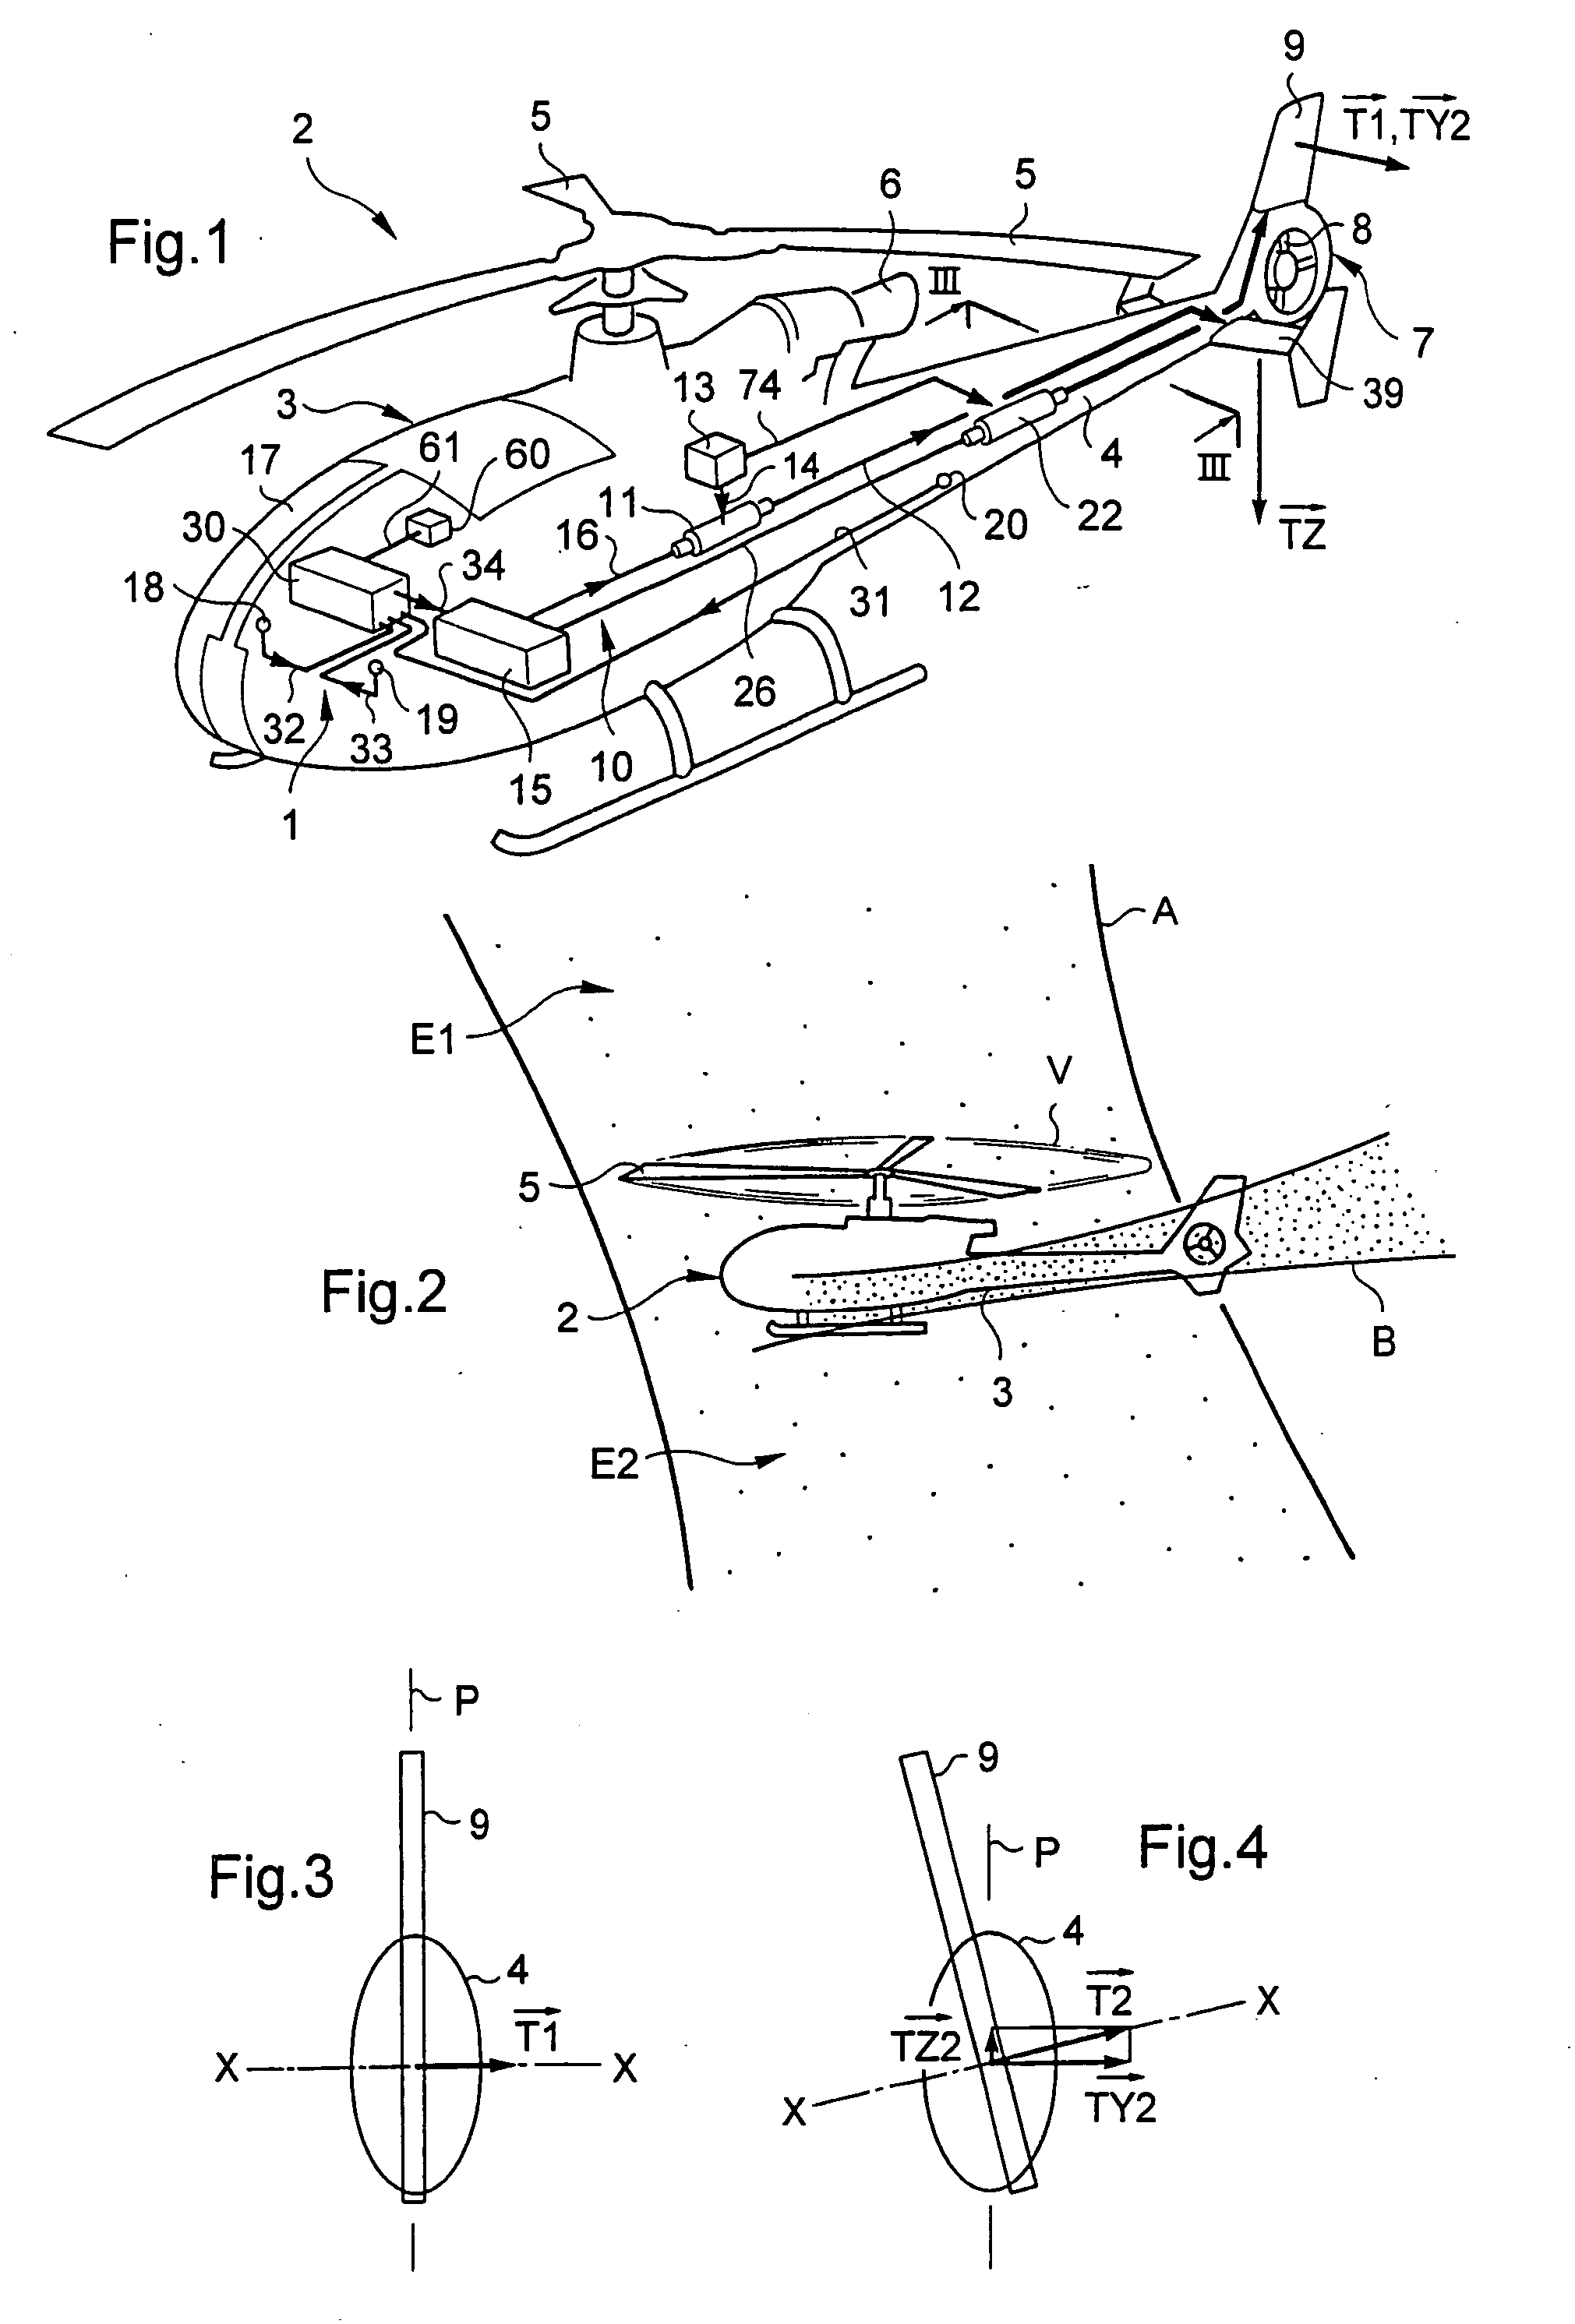 Method and a device for using a tiltable stabilizer to reduce vibration generated on the fuselage of a helicopter